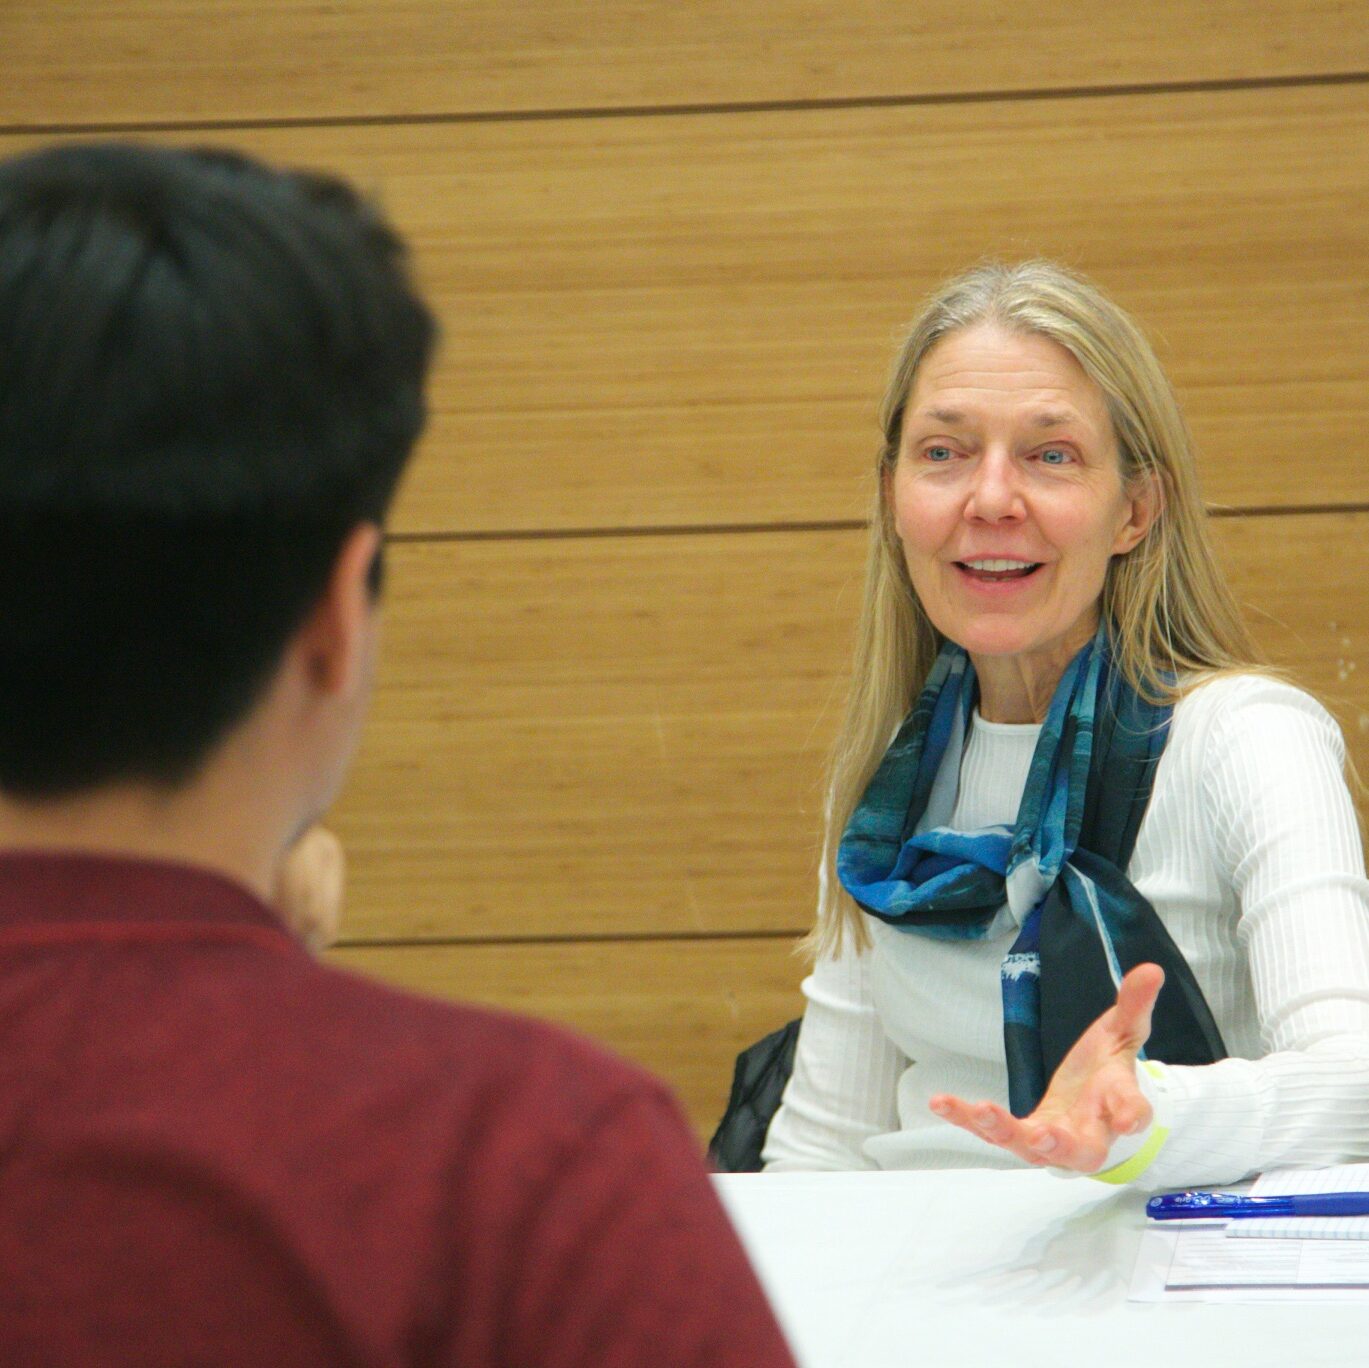 Advisor speaking with a student during a session at a white table